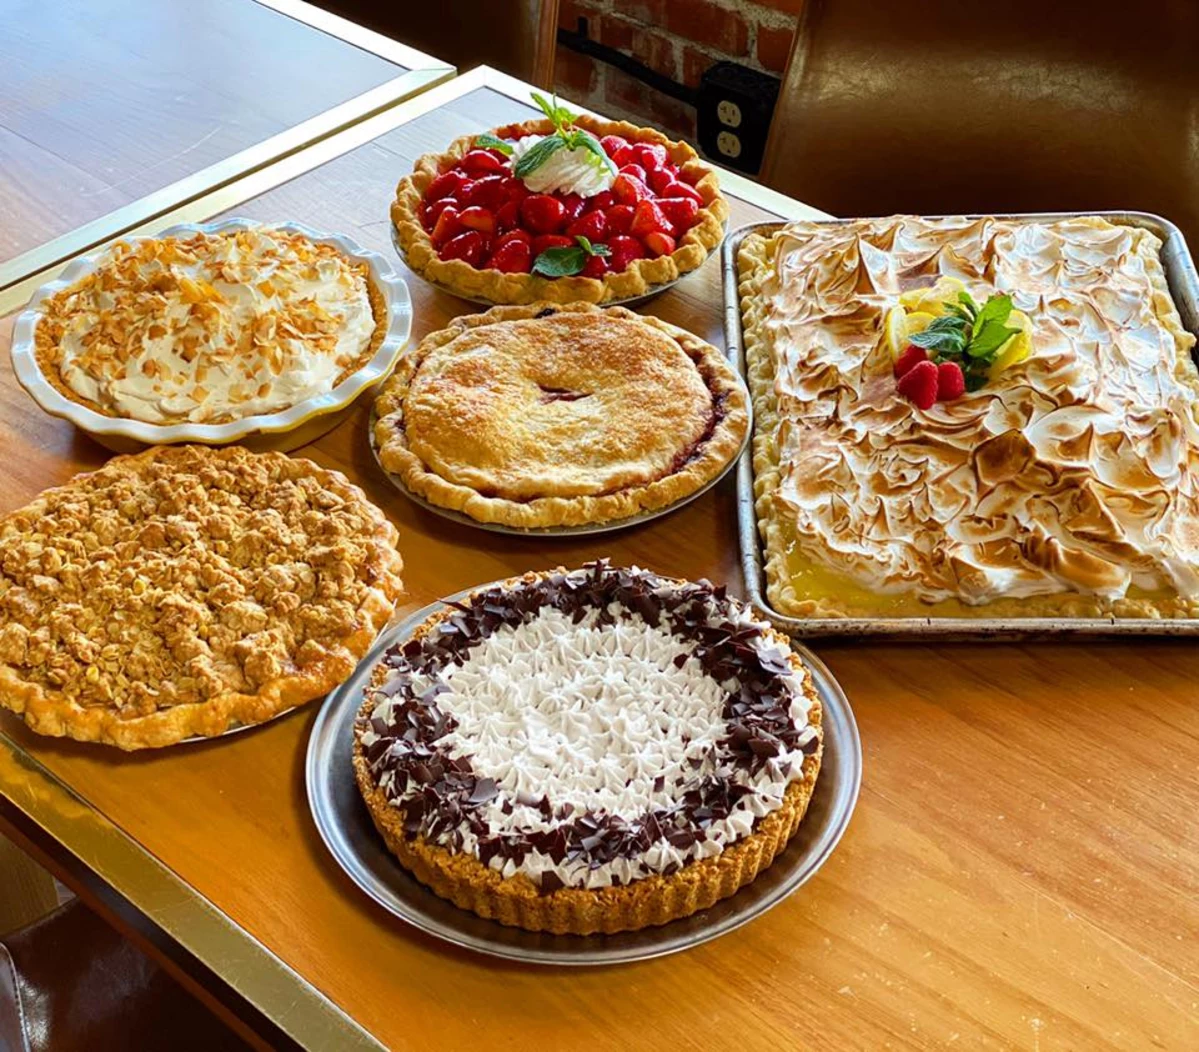 Best Local Spots To Get Homemade Pies On National Pie Day